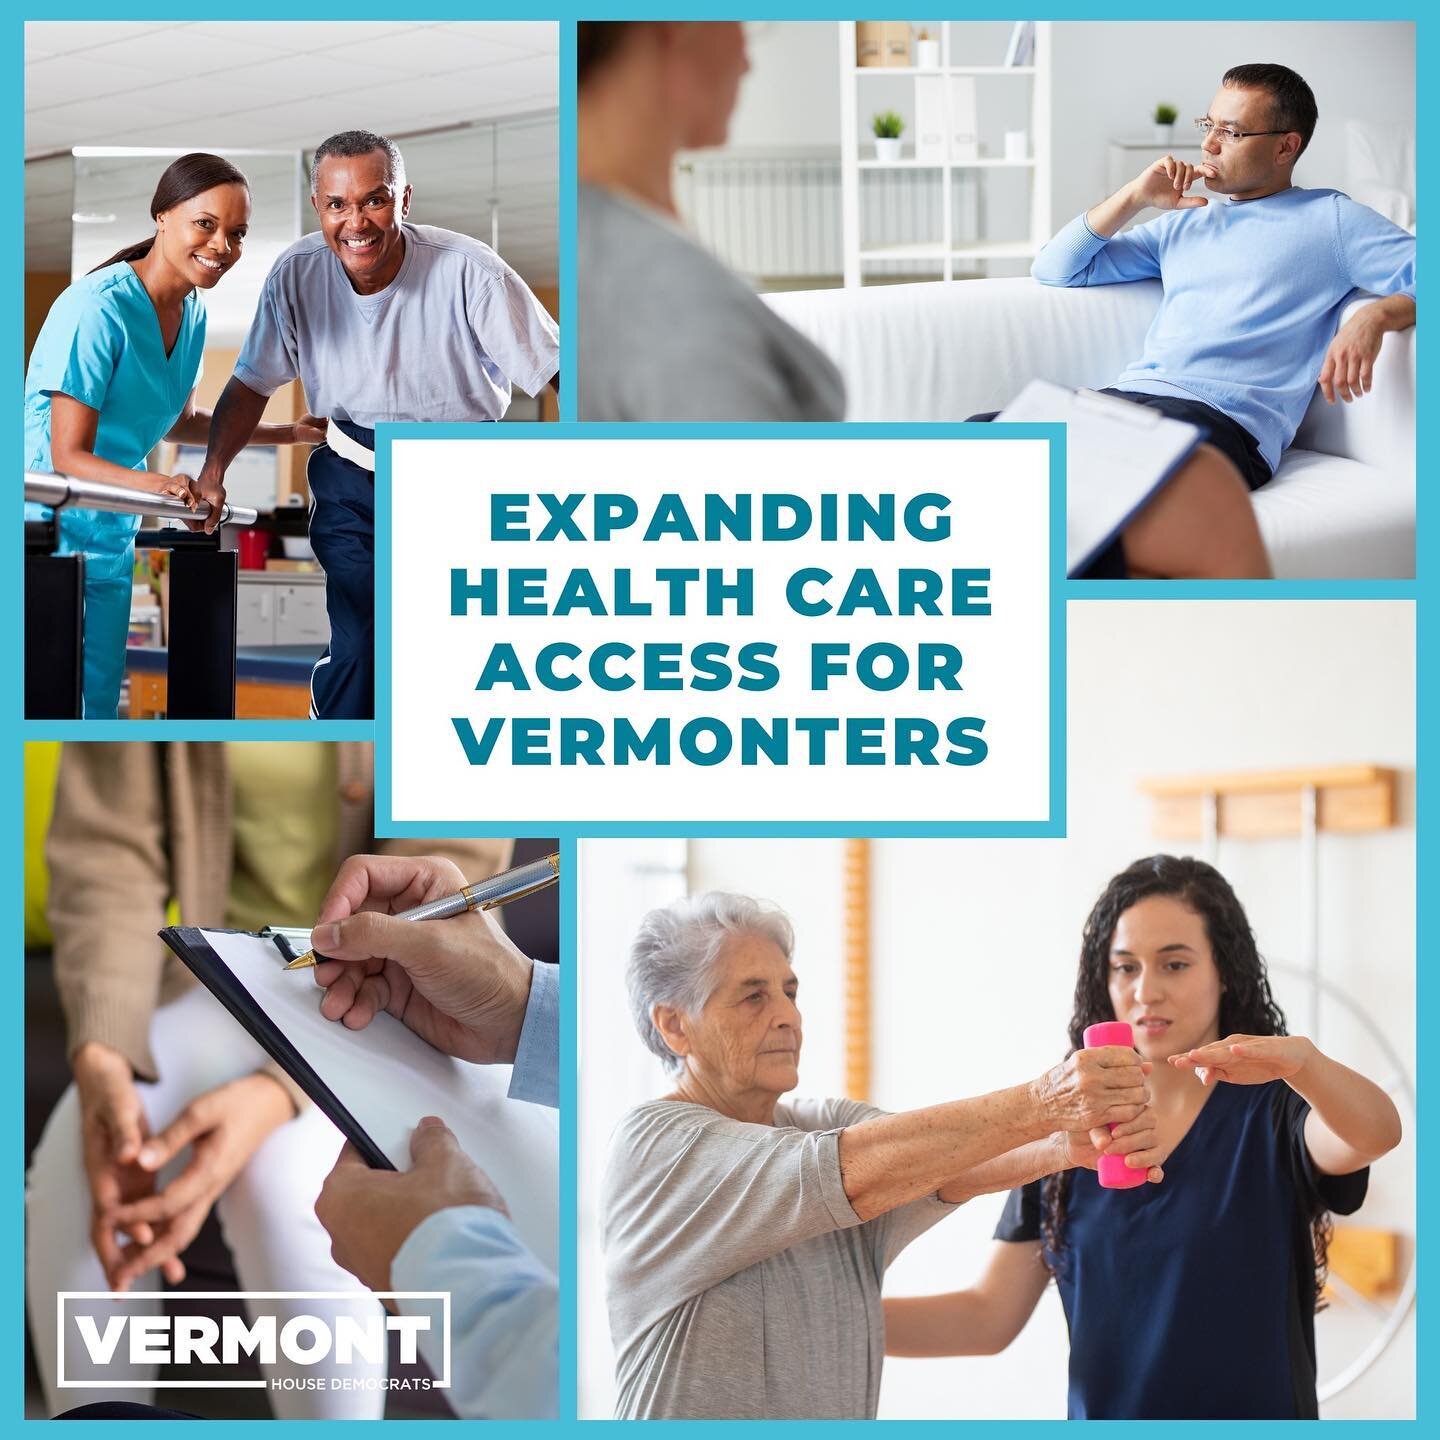 Looking for some good news? In recent weeks, the House passed four occupational compact bills to increase access to quality health care for Vermonters and modernize our workforce. Joining interstate occupational compacts opens access to more provider